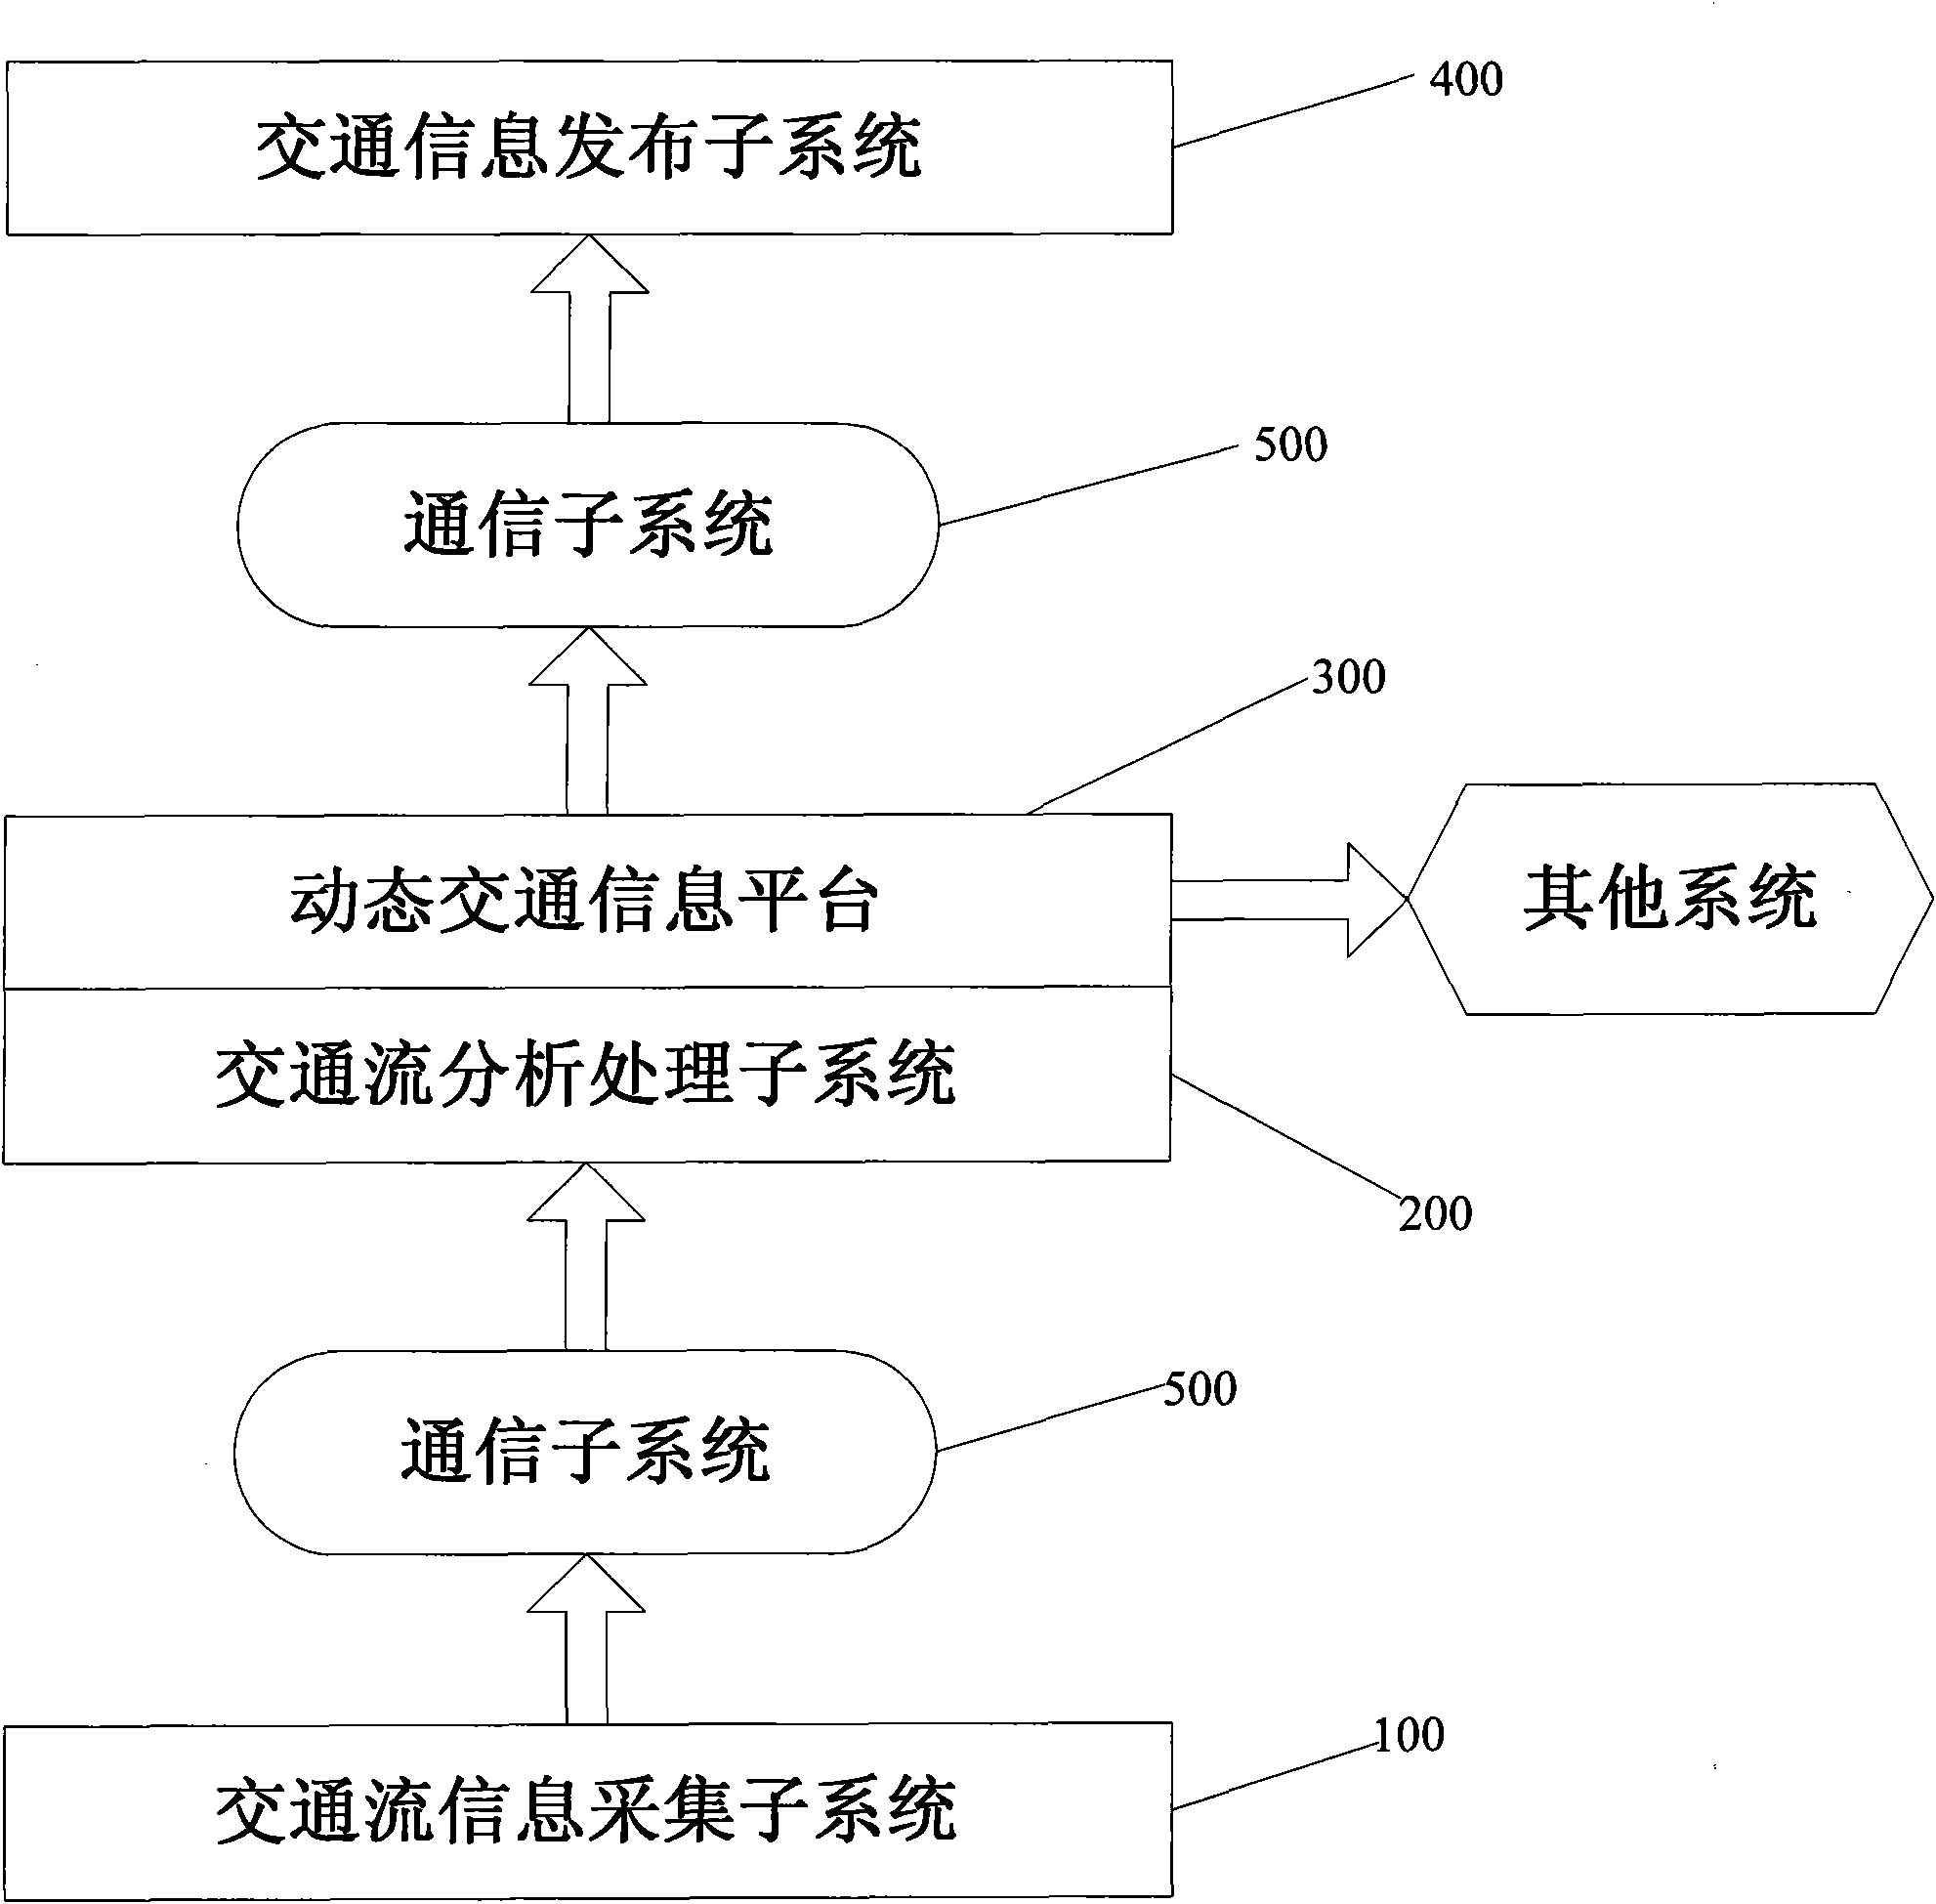 Urban road traffic information detecting and issuing system